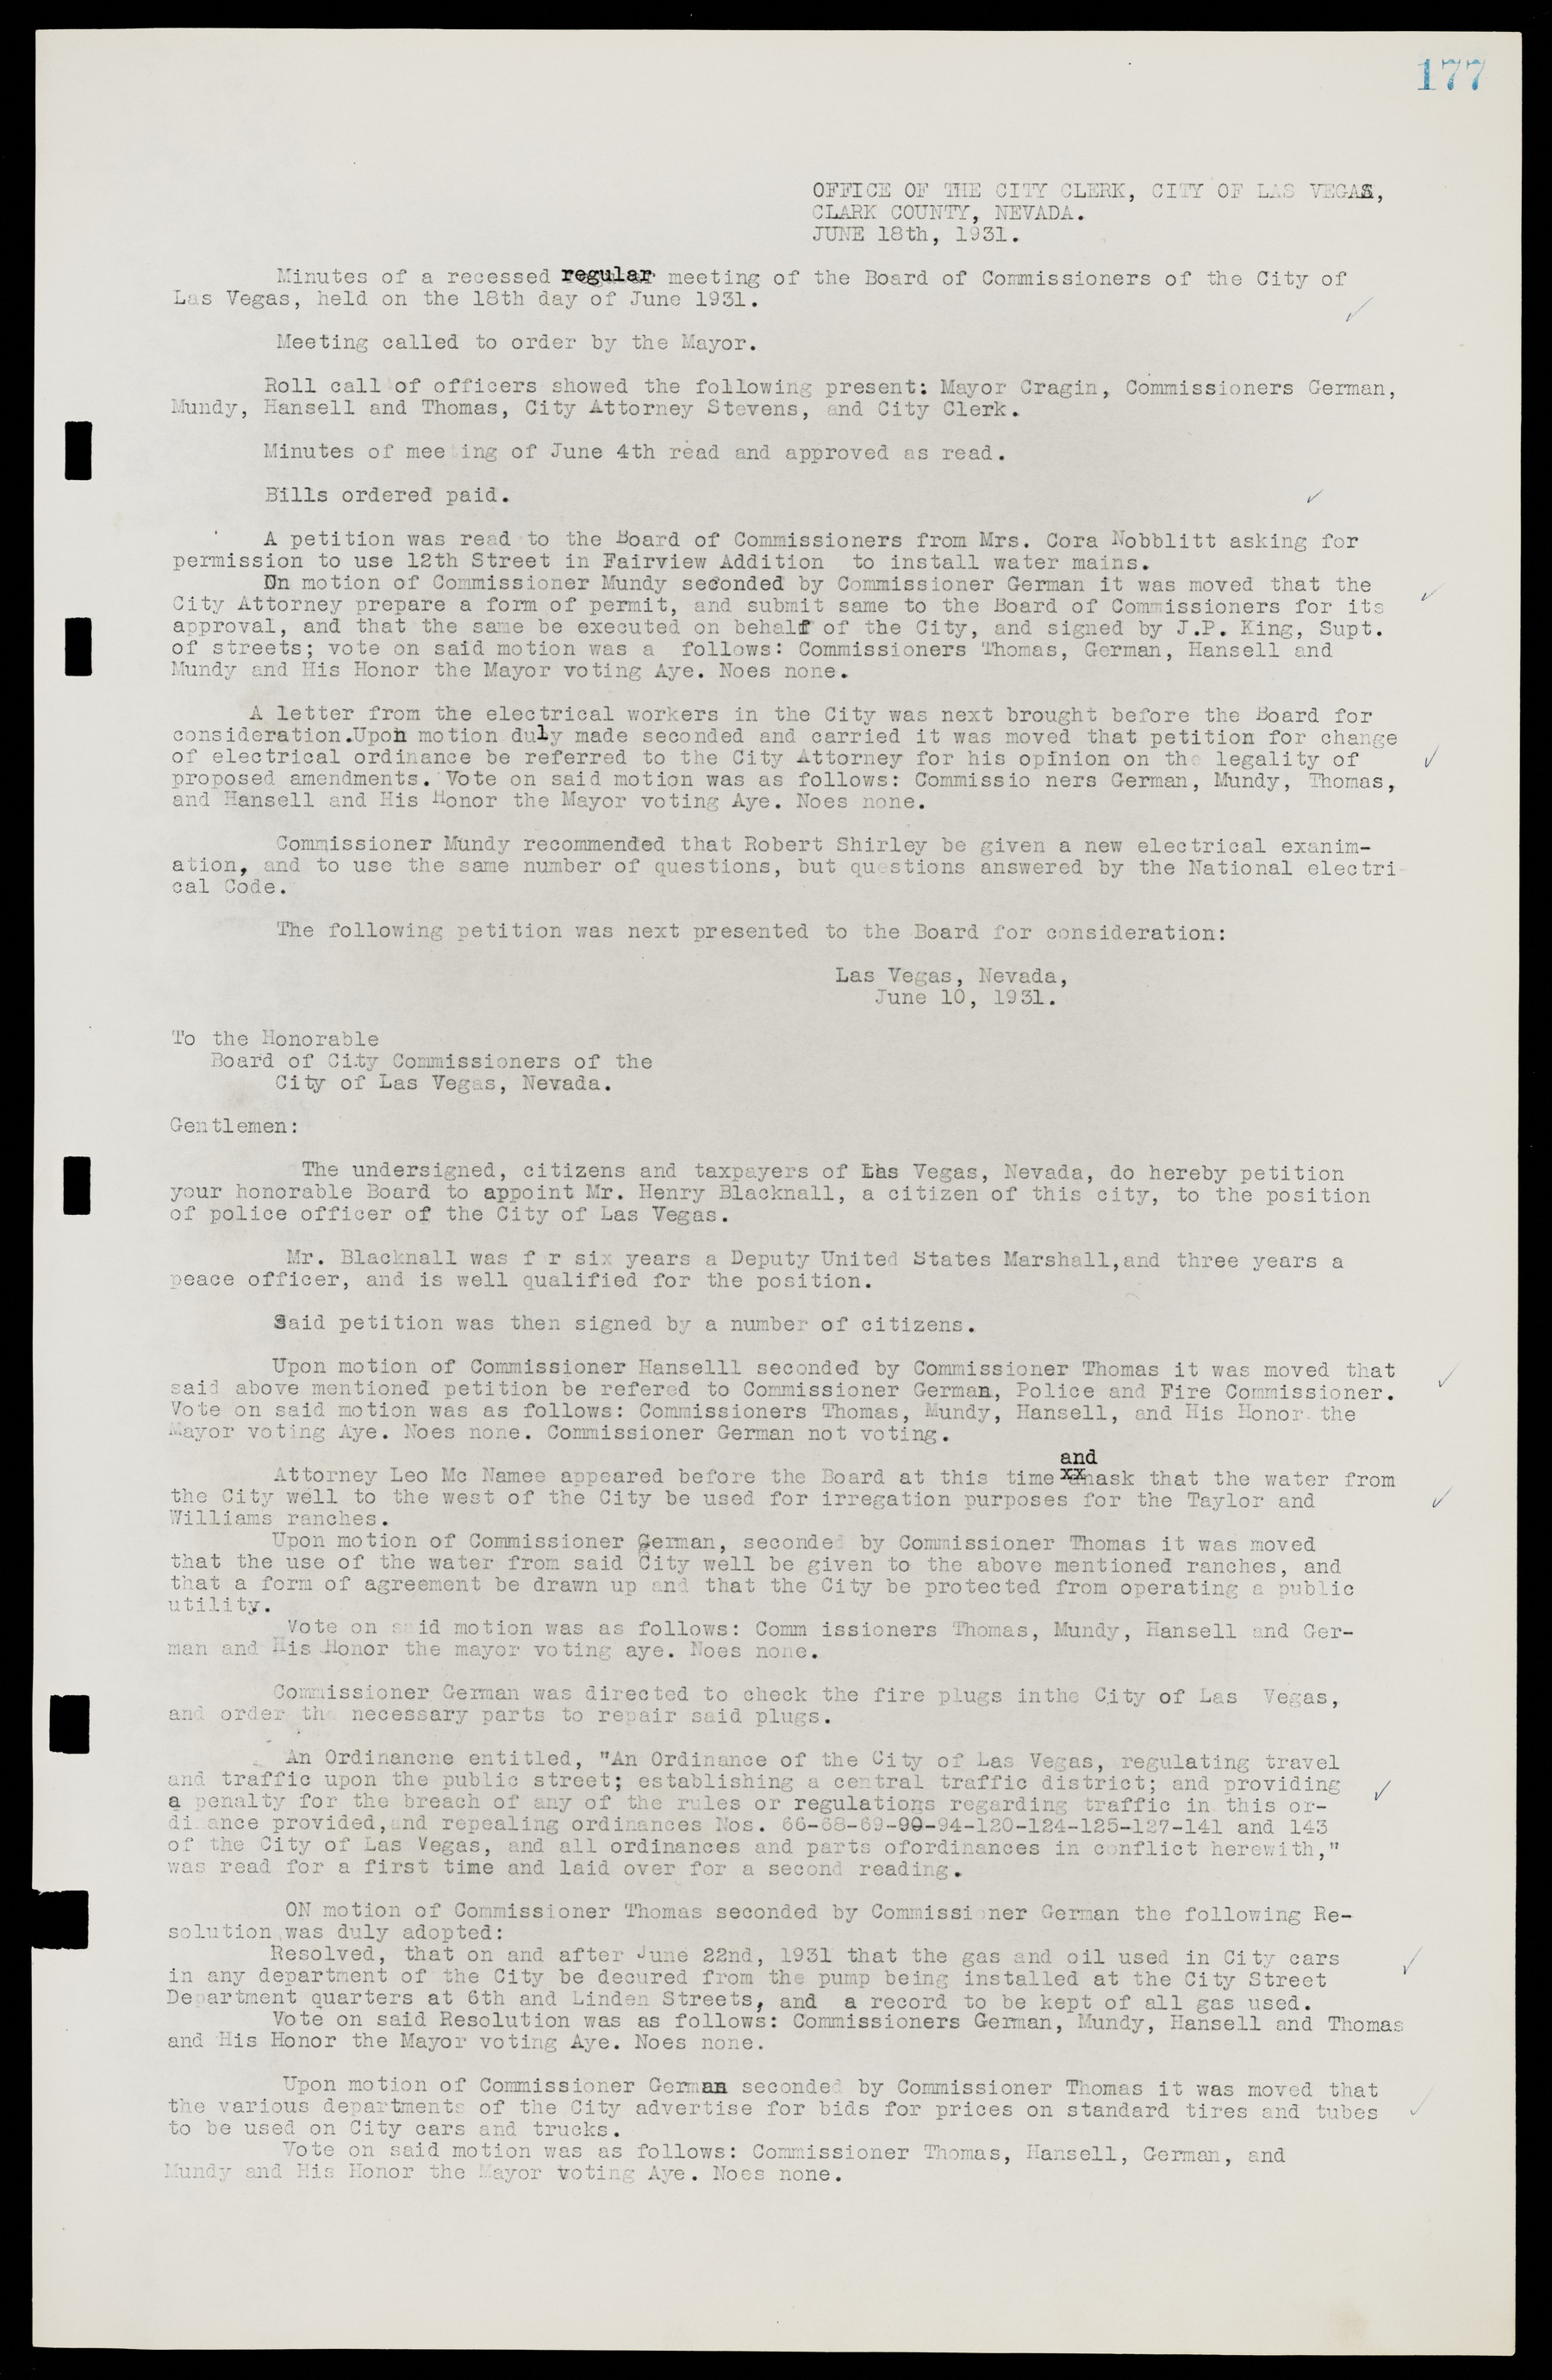 Las Vegas City Commission Minutes, May 14, 1929 to February 11, 1937, lvc000003-183